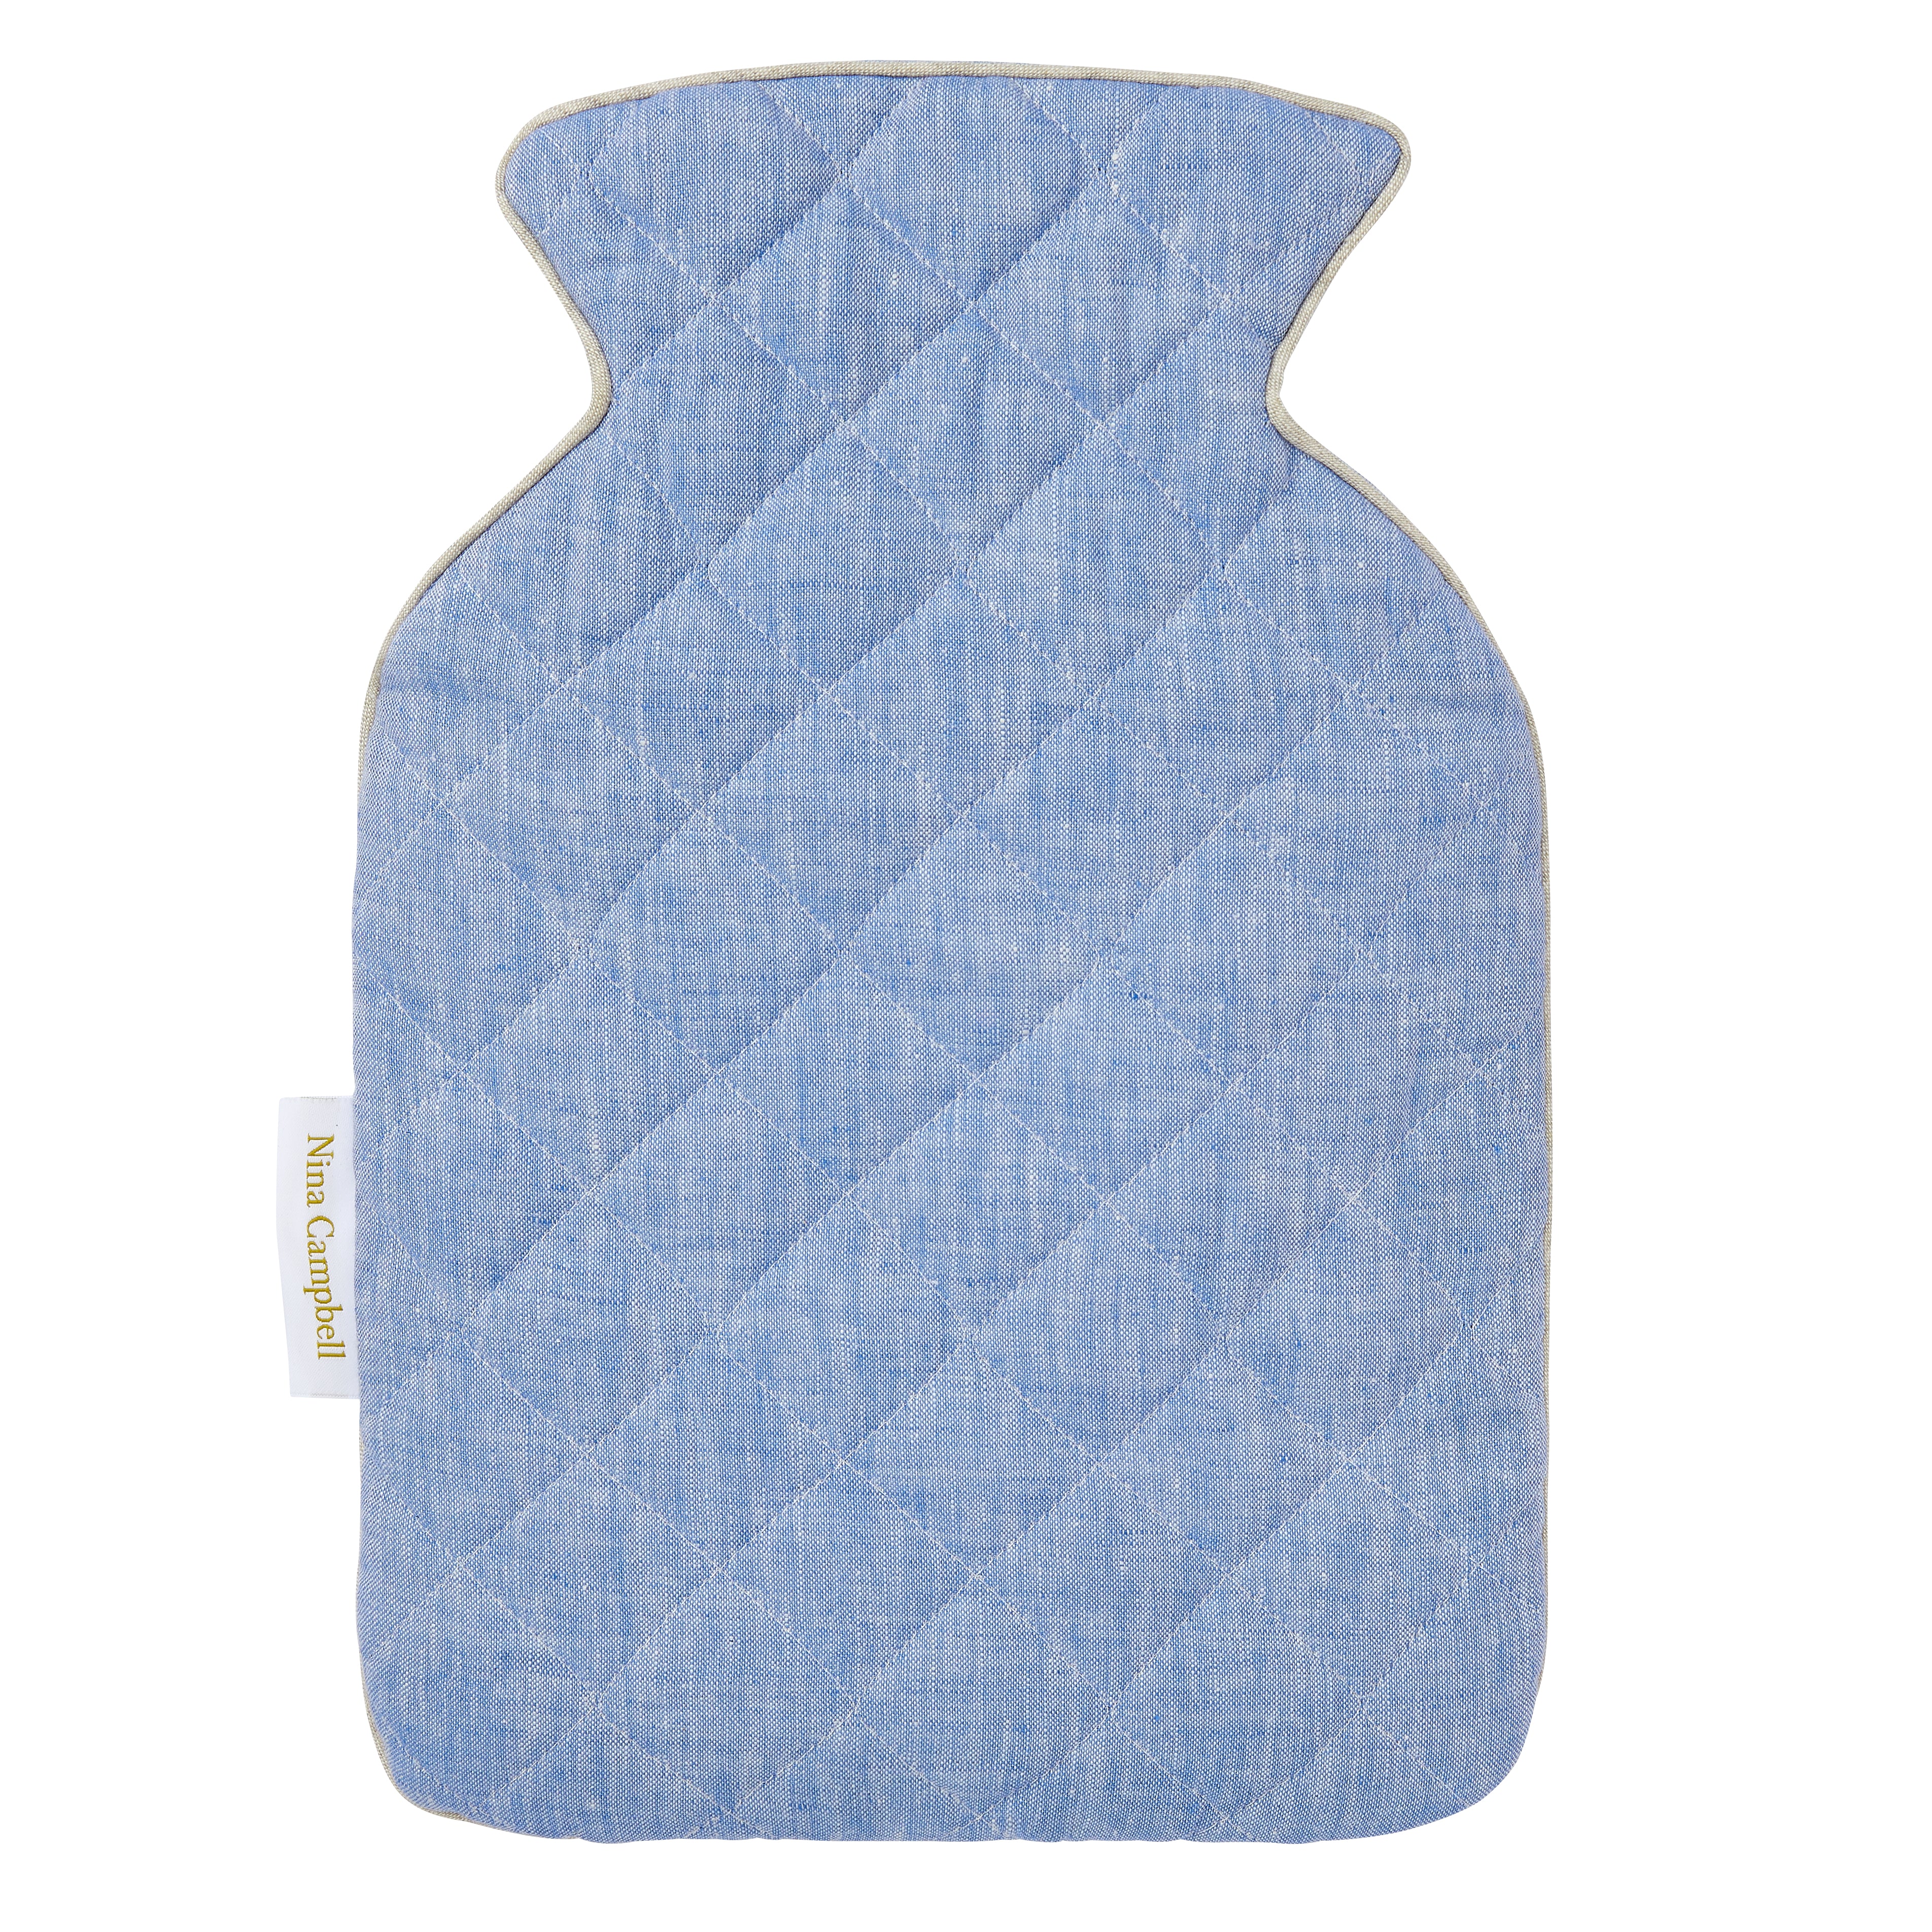 Nina Campbell Hot Water Bottle Cover - Blue/Grey